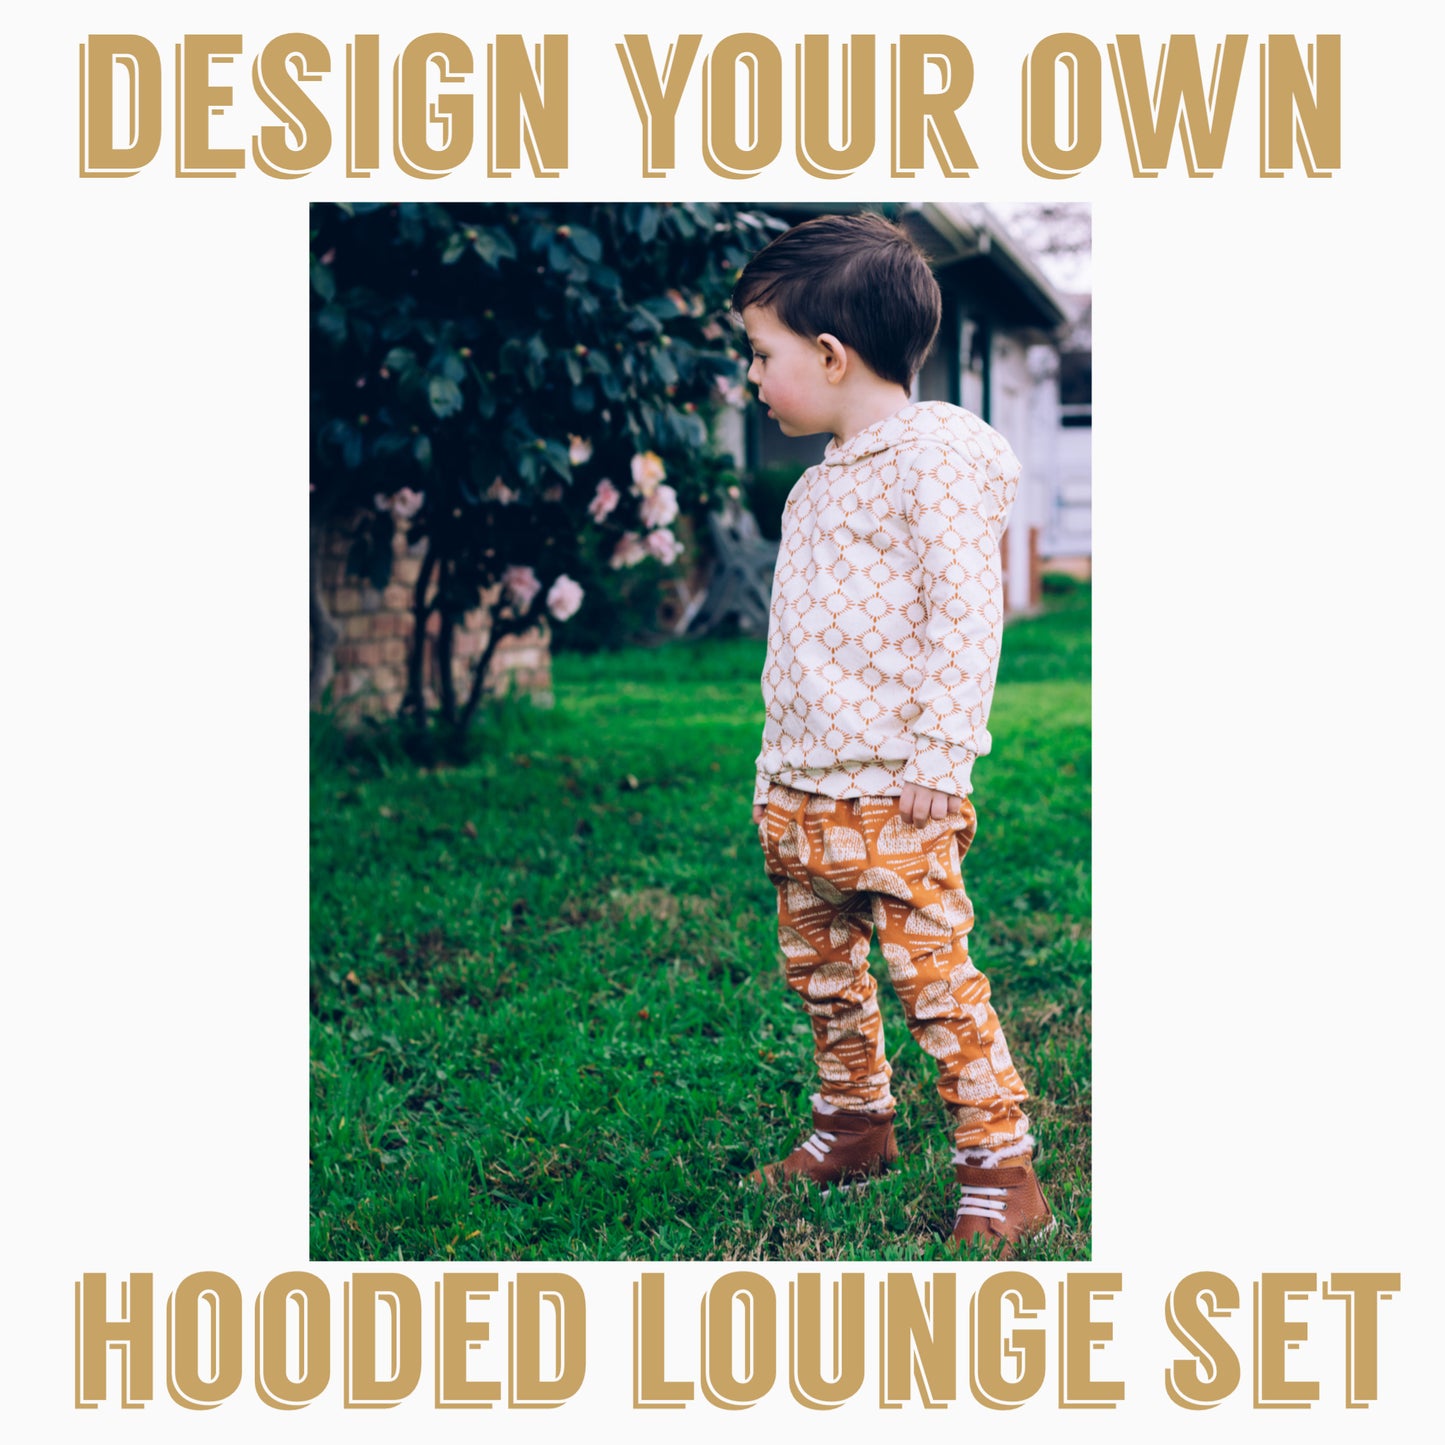 Design your own| Hooded Lounge Set